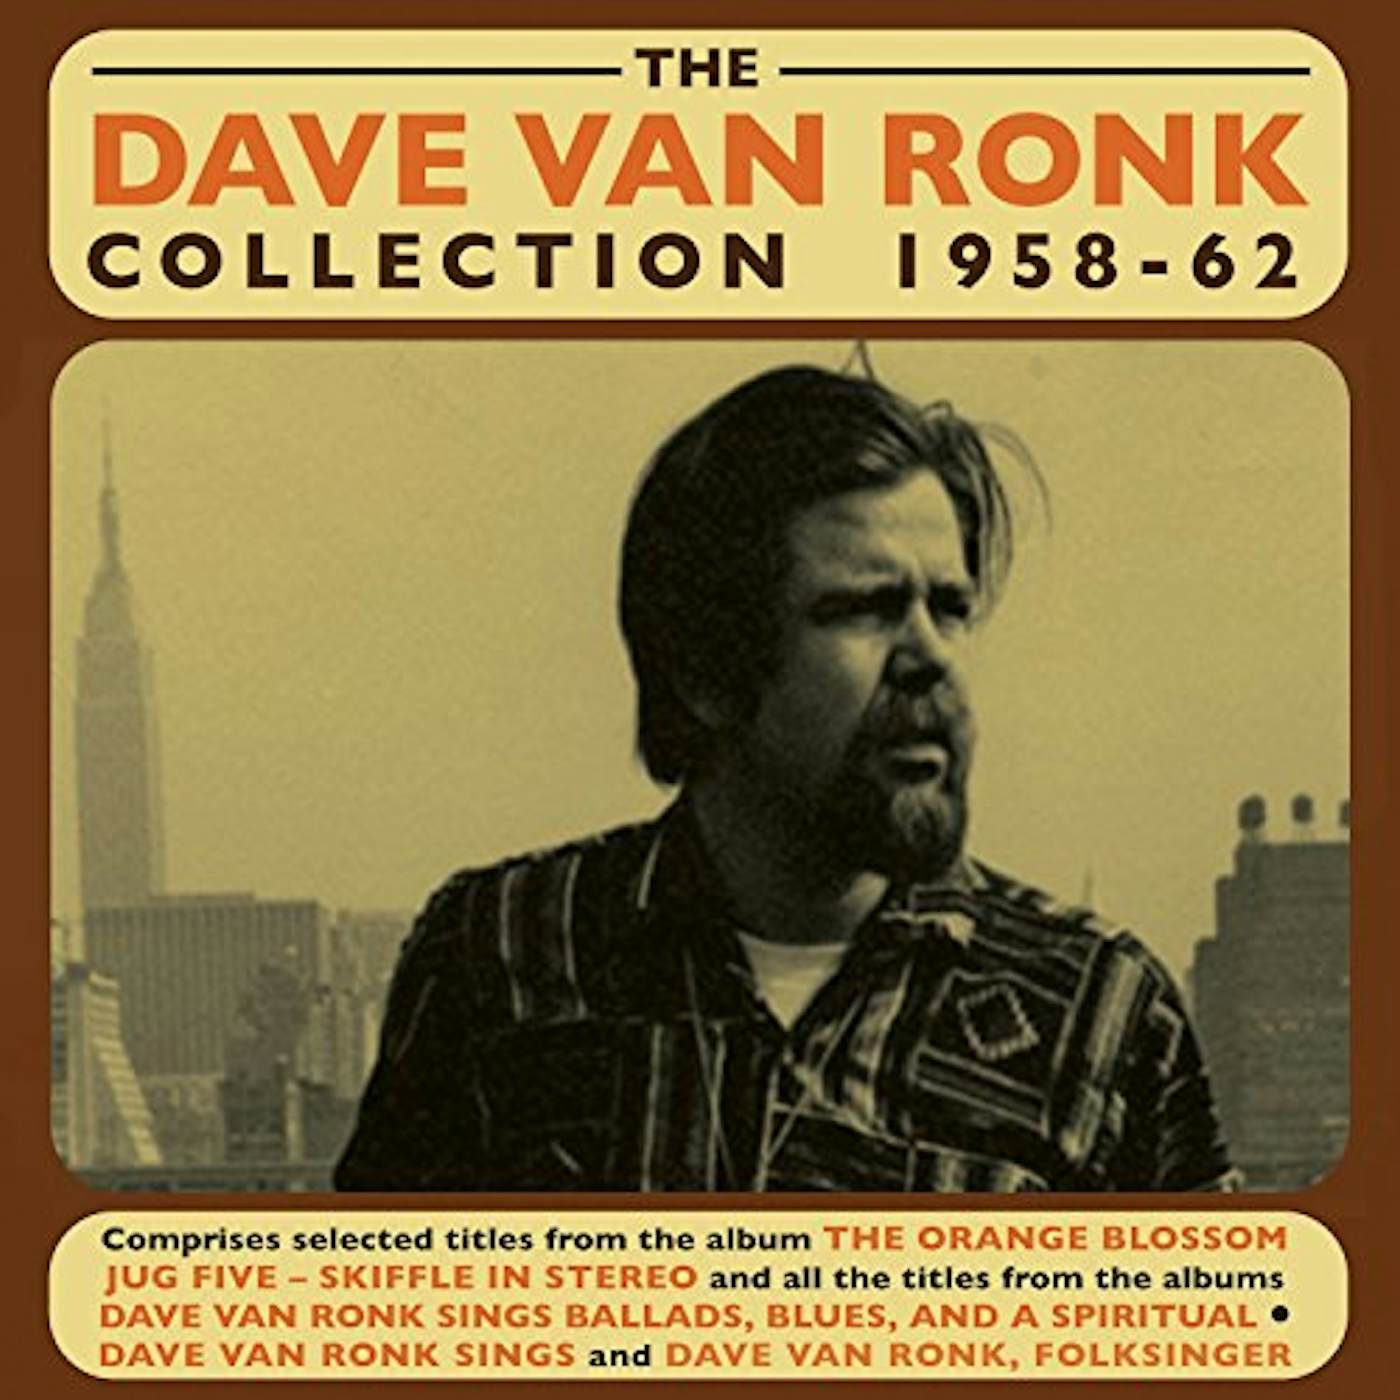 DAVE VAN RONK COLLECTION 1958-62 CD